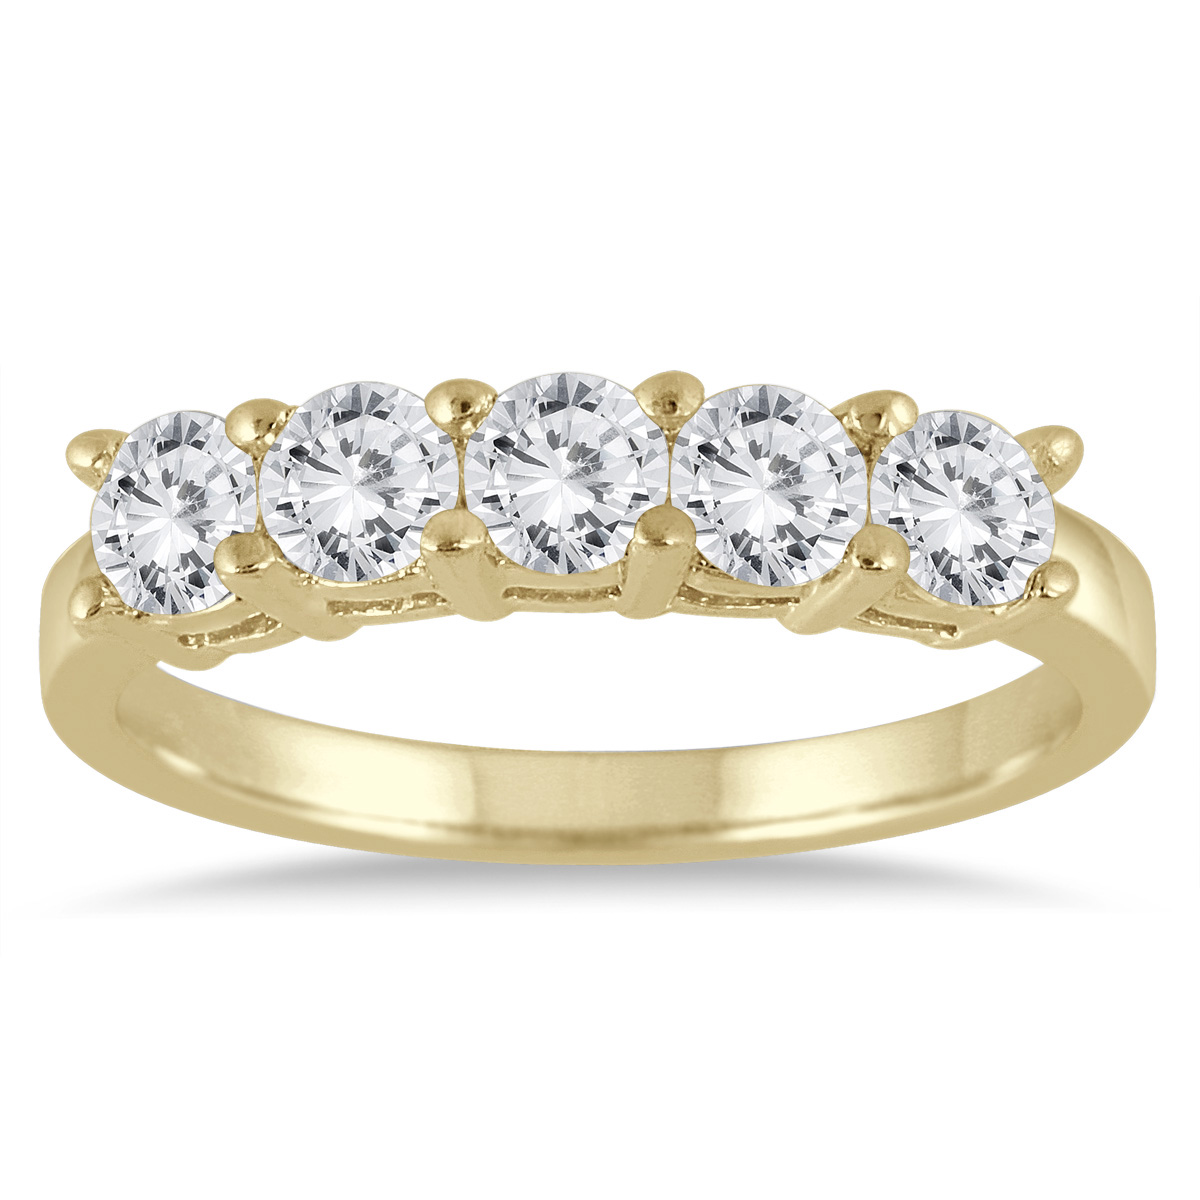 1 Carat TW Five Stone Wedding Band in 14K Yellow Gold